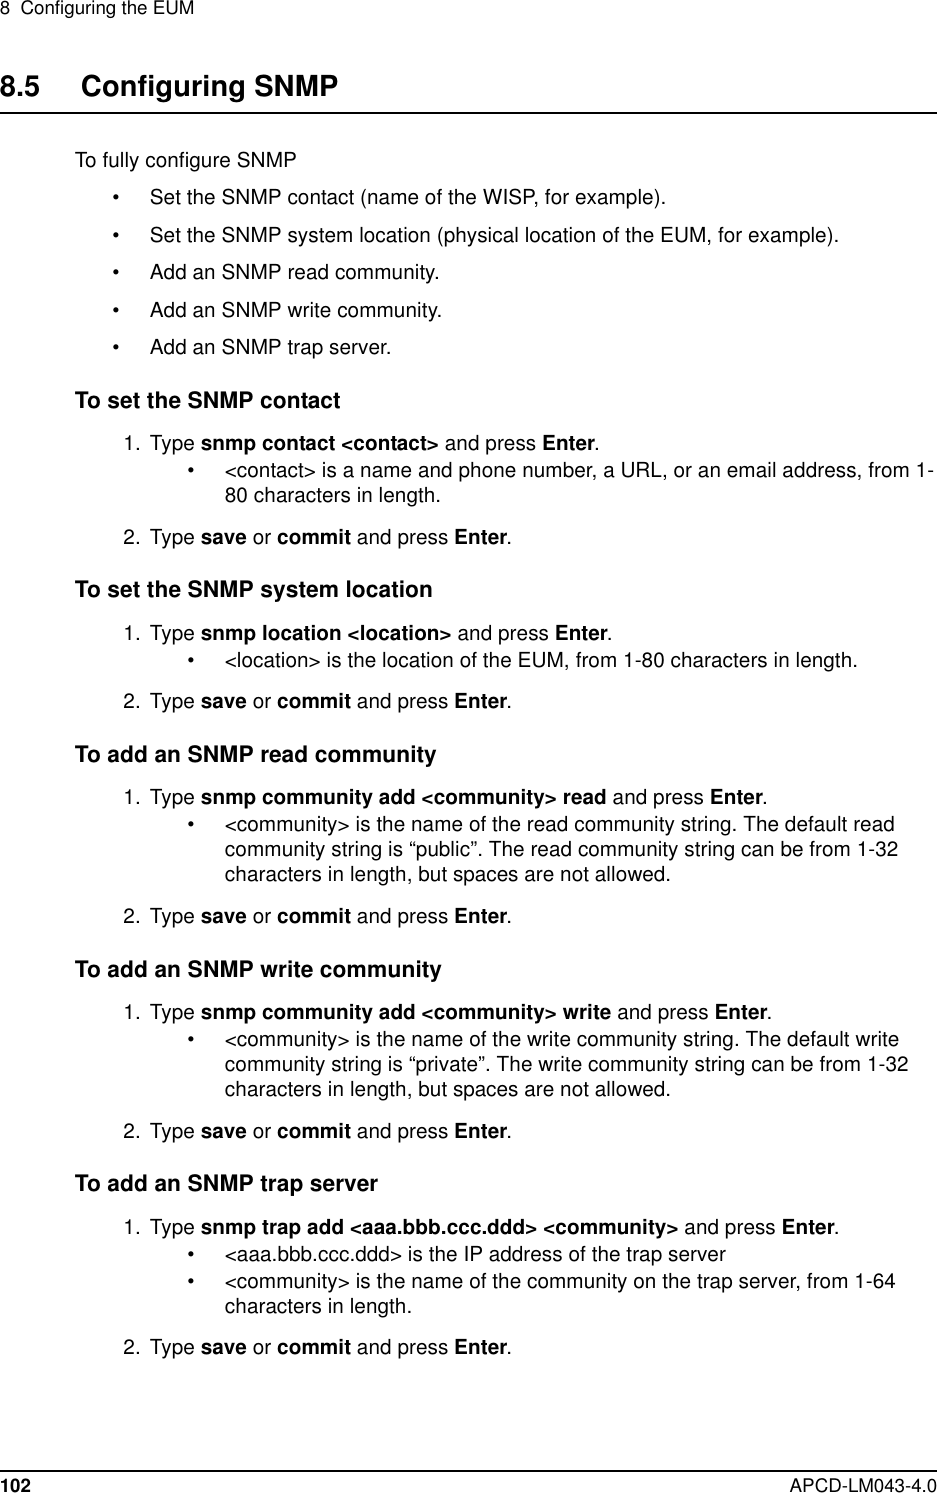 8 Configuring the EUM102 APCD-LM043-4.08.5 Configuring SNMPTo fully configure SNMP• Set the SNMP contact (name of the WISP, for example).• Set the SNMP system location (physical location of the EUM, for example).• Add an SNMP read community.• Add an SNMP write community.• Add an SNMP trap server.To set the SNMP contact1. Type snmp contact &lt;contact&gt; and press Enter.• &lt;contact&gt; is a name and phone number, a URL, or an email address, from 1-80 characters in length.2. Type save or commit and press Enter.To set the SNMP system location1. Type snmp location &lt;location&gt; and press Enter.• &lt;location&gt; is the location of the EUM, from 1-80 characters in length.2. Type save or commit and press Enter.To add an SNMP read community1. Type snmp community add &lt;community&gt; read and press Enter.• &lt;community&gt; is the name of the read community string. The default readcommunity string is “public”. The read community string can be from 1-32characters in length, but spaces are not allowed.2. Type save or commit and press Enter.To add an SNMP write community1. Type snmp community add &lt;community&gt; write and press Enter.• &lt;community&gt; is the name of the write community string. The default writecommunity string is “private”. The write community string can be from 1-32characters in length, but spaces are not allowed.2. Type save or commit and press Enter.To add an SNMP trap server1. Type snmp trap add &lt;aaa.bbb.ccc.ddd&gt; &lt;community&gt; and press Enter.• &lt;aaa.bbb.ccc.ddd&gt; is the IP address of the trap server• &lt;community&gt; is the name of the community on the trap server, from 1-64characters in length.2. Type save or commit and press Enter.